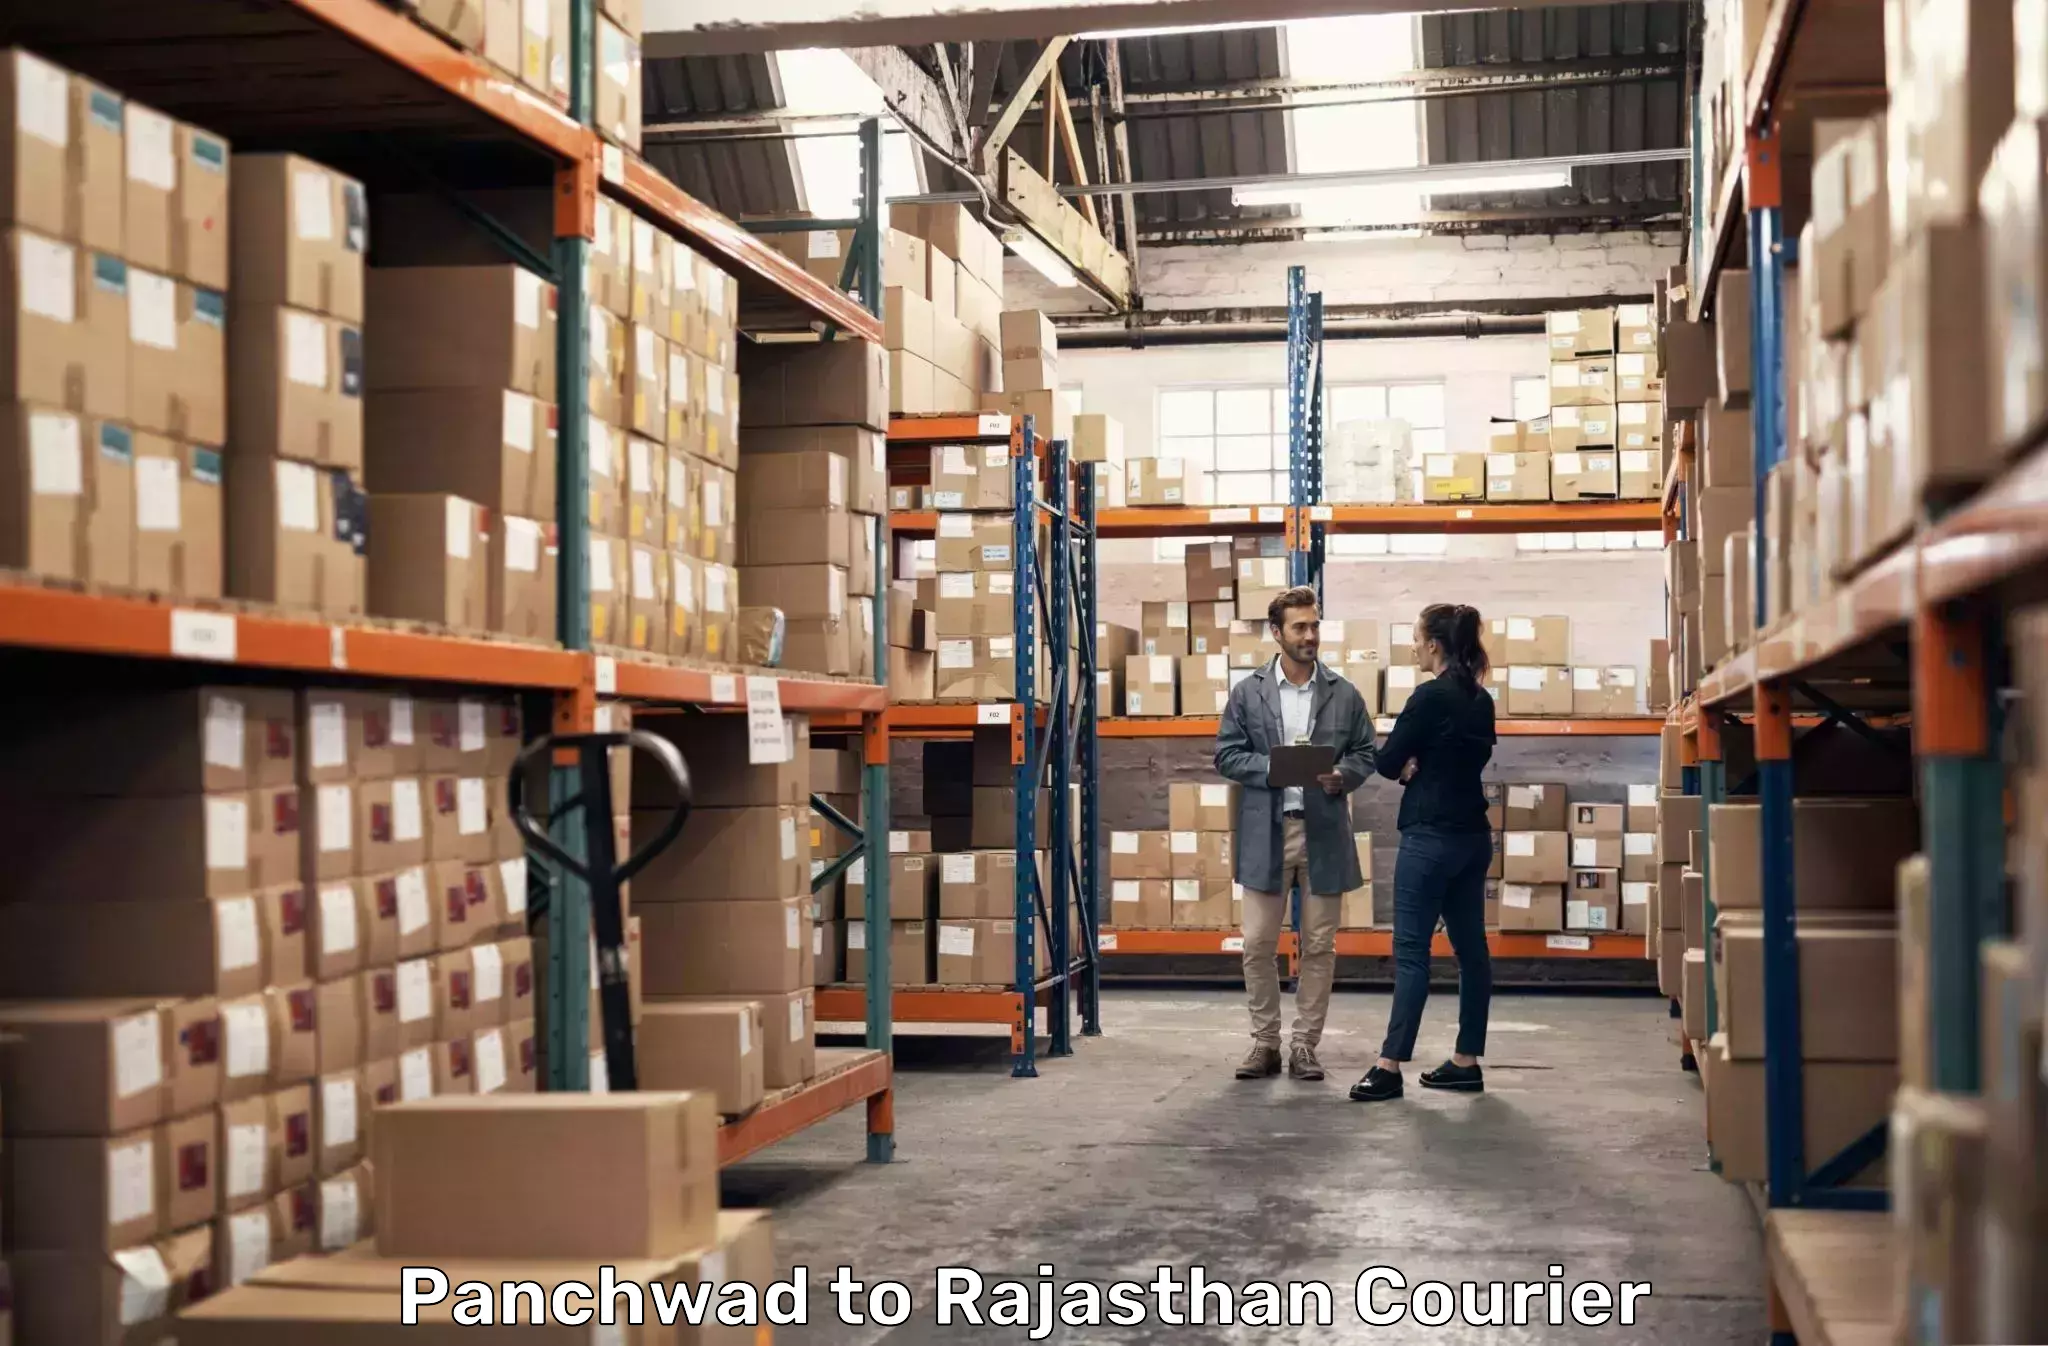 Customer-focused courier Panchwad to Pokhran